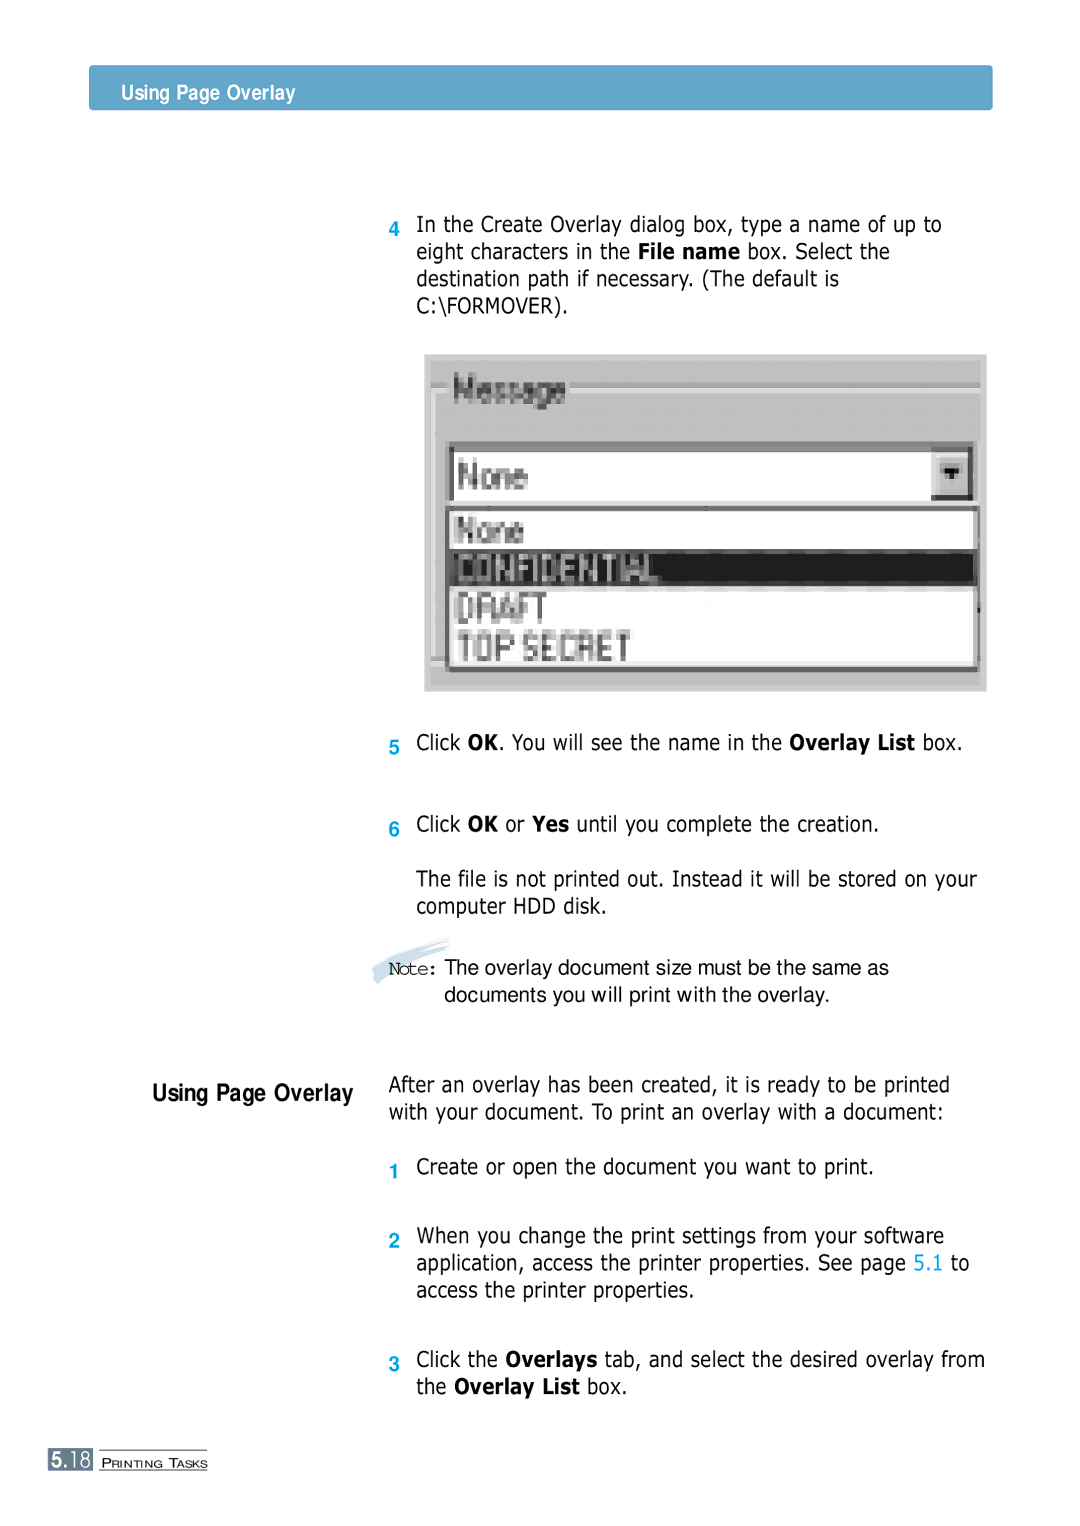 Samsung ML-4600 manual Using Page Overlay, Create or open the document you want to print 